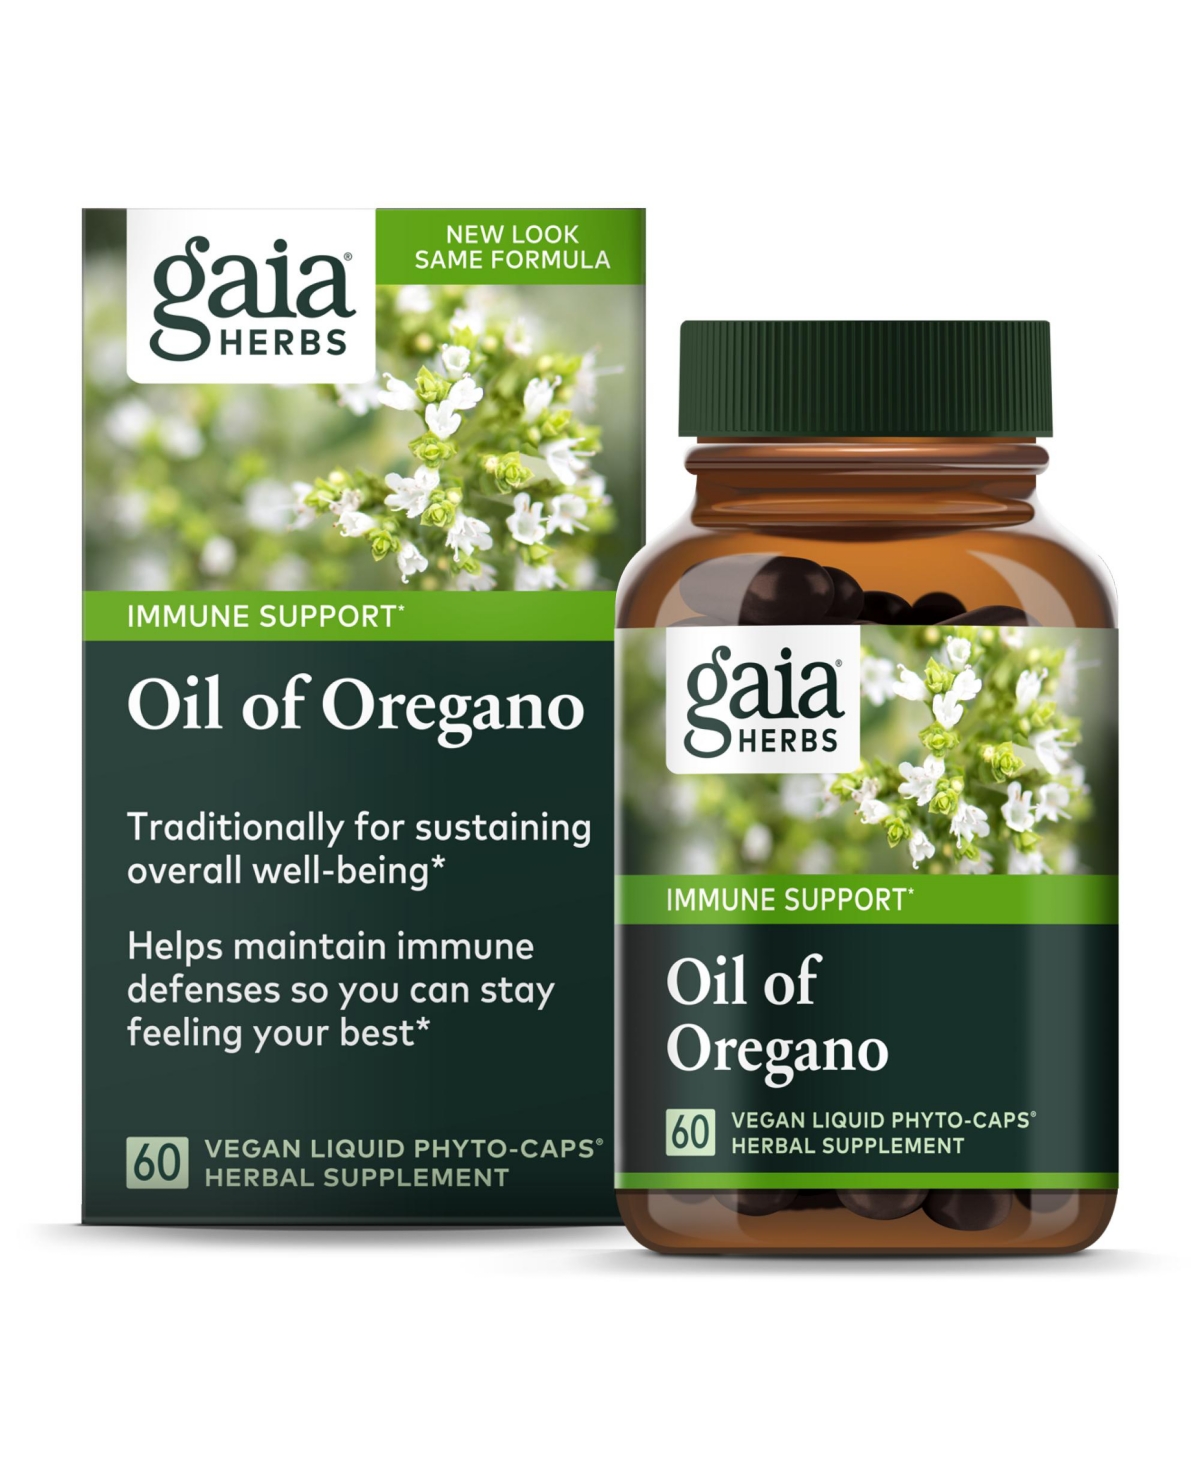 Oil of Oregano - Immune and Antioxidant Support Supplement to Help Sustain Overall Well-Being - With Oregano Oil, Carvacrol, and Thymol - 6